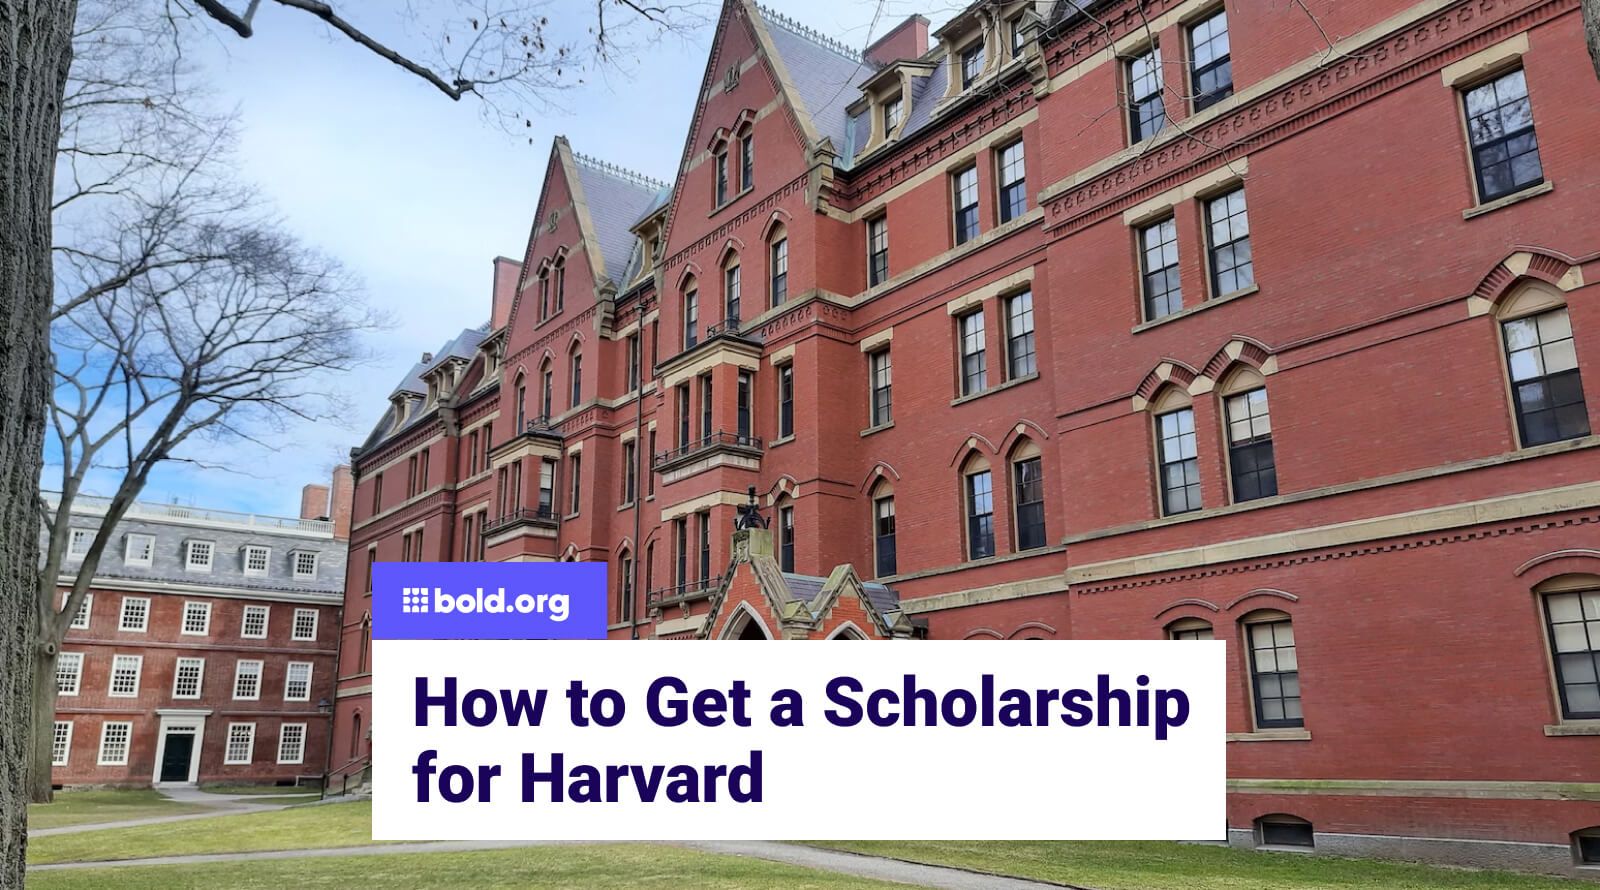 How to Get a Scholarship for Harvard